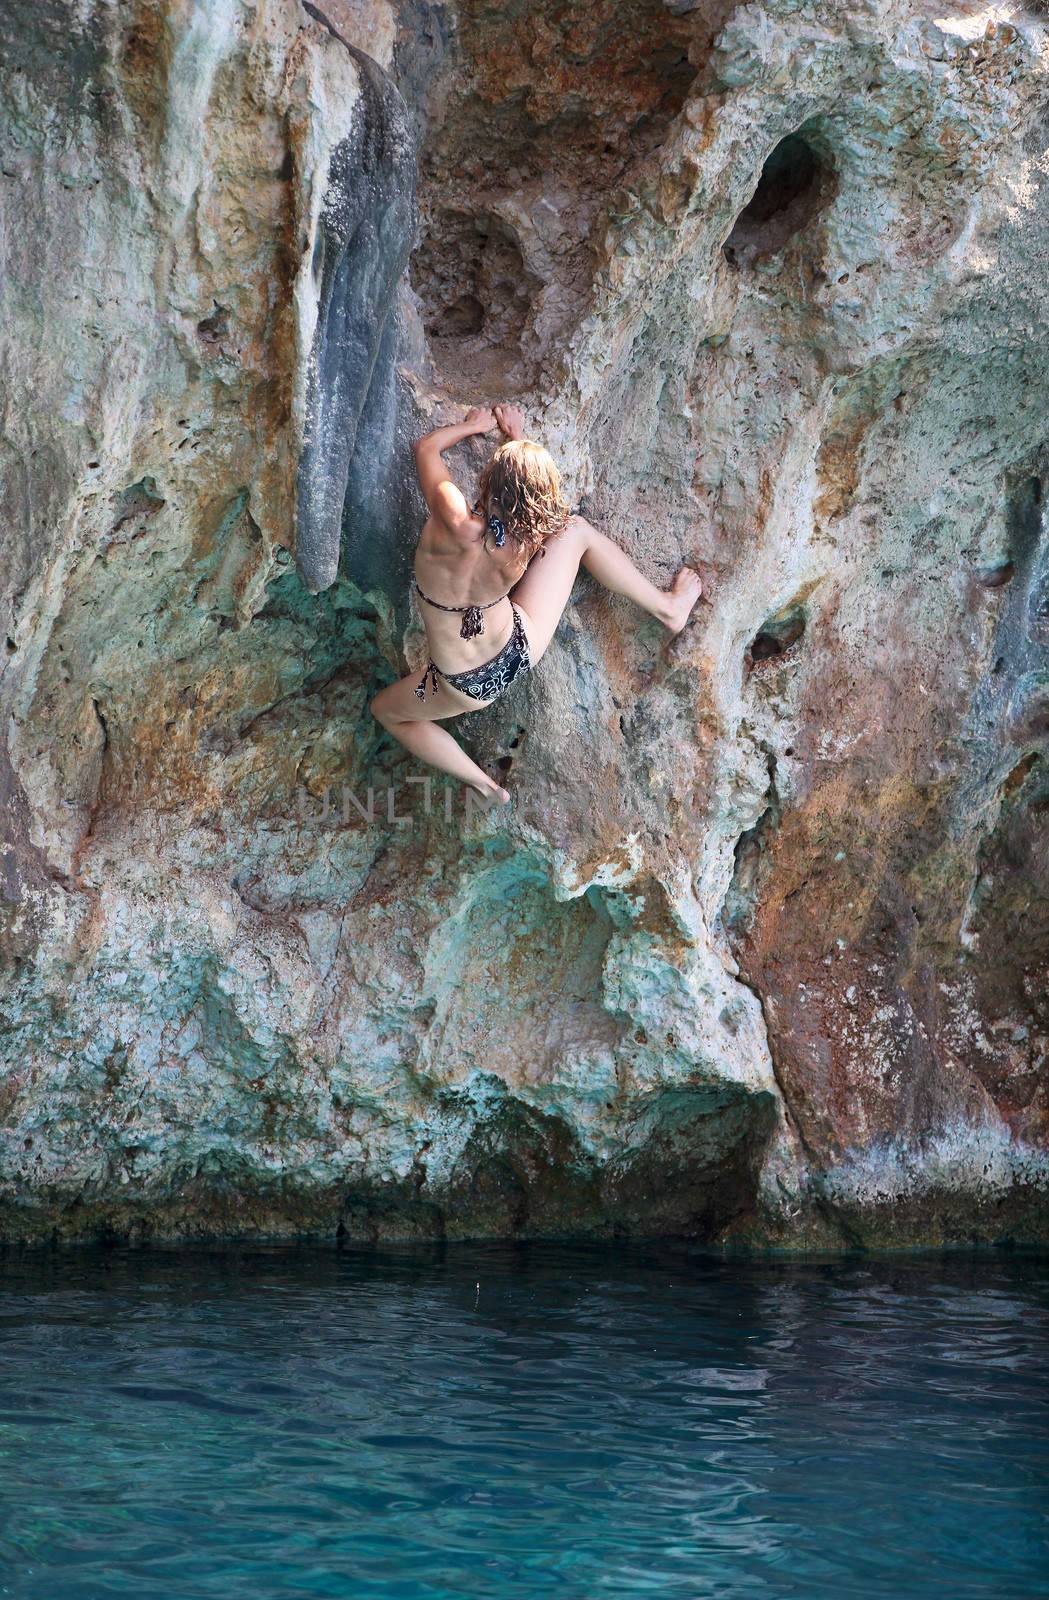 Deep water soloing, young female rock climber on face of cliff